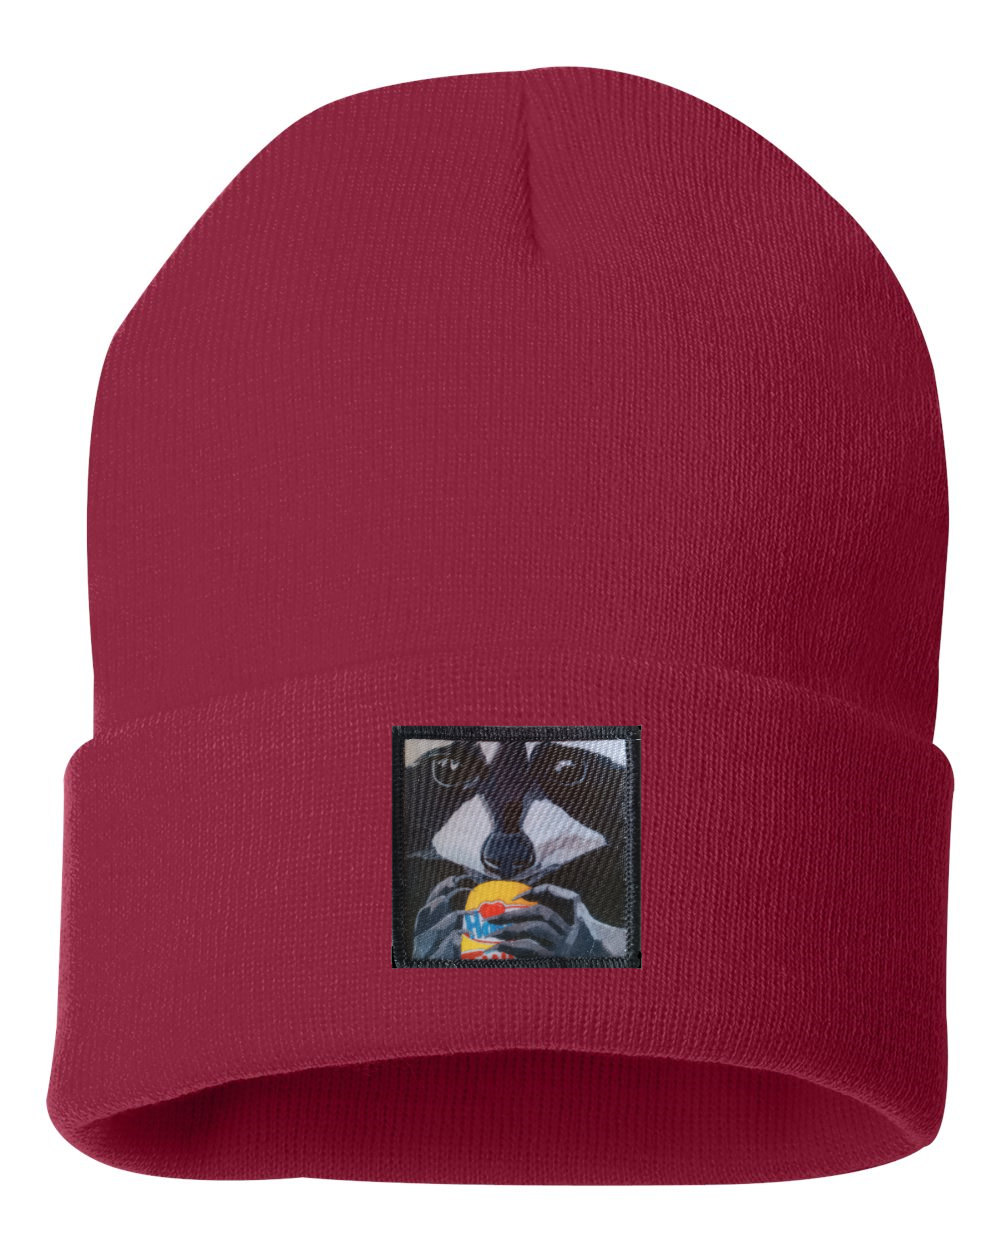 The Snack Kid Raccoon Beanie Hats Flyn Costello Cardinal Red  